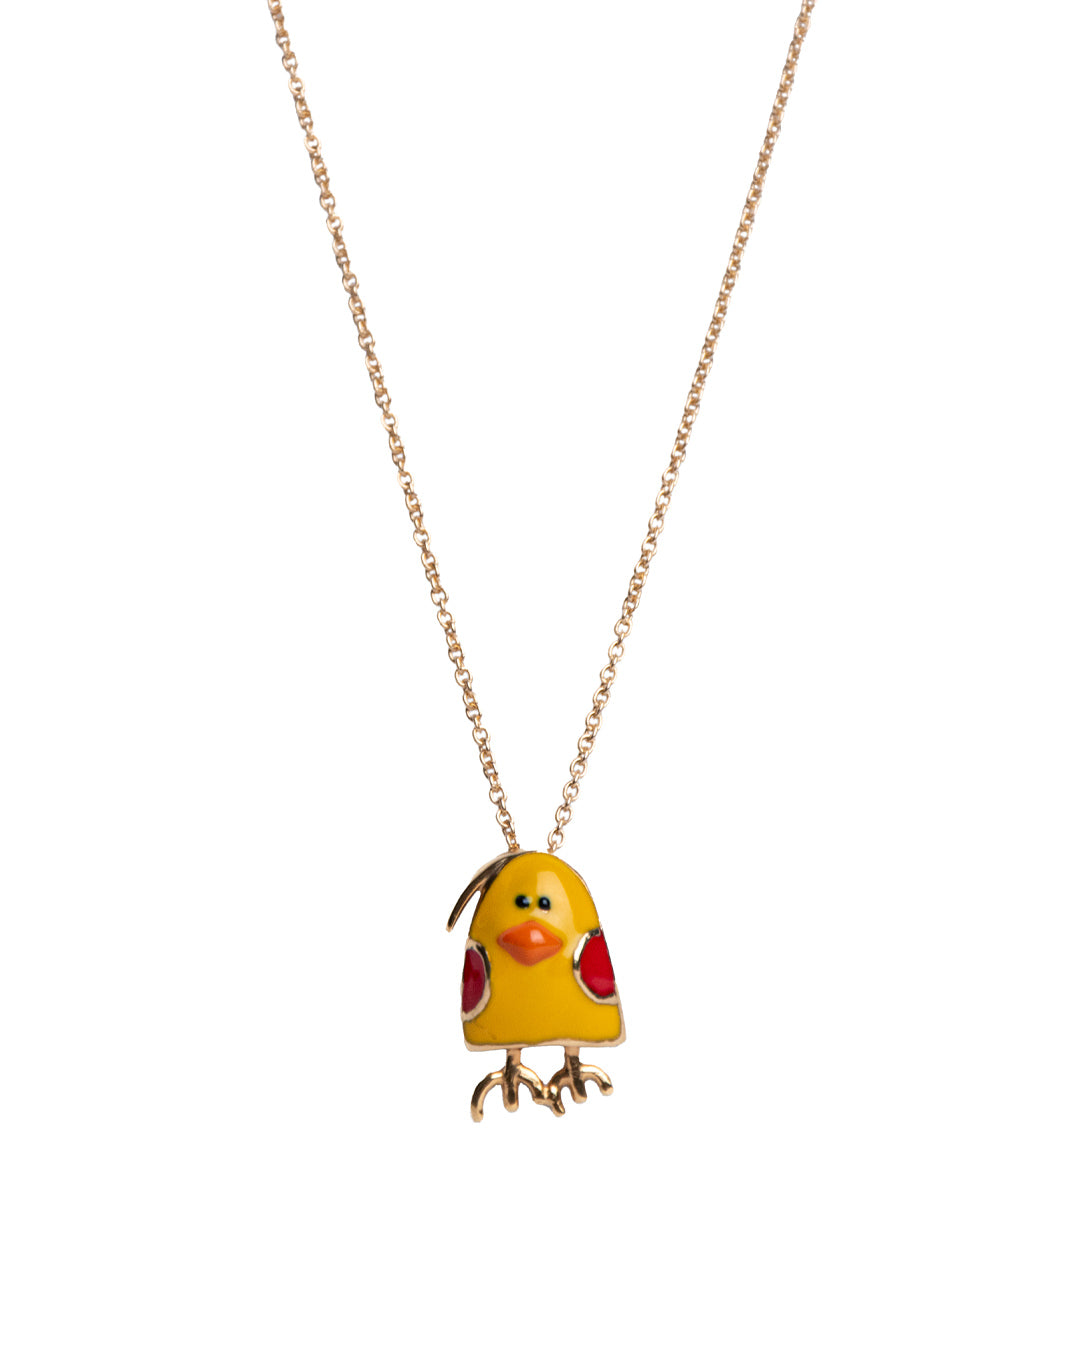 Handmade handcrafted chick necklace gold